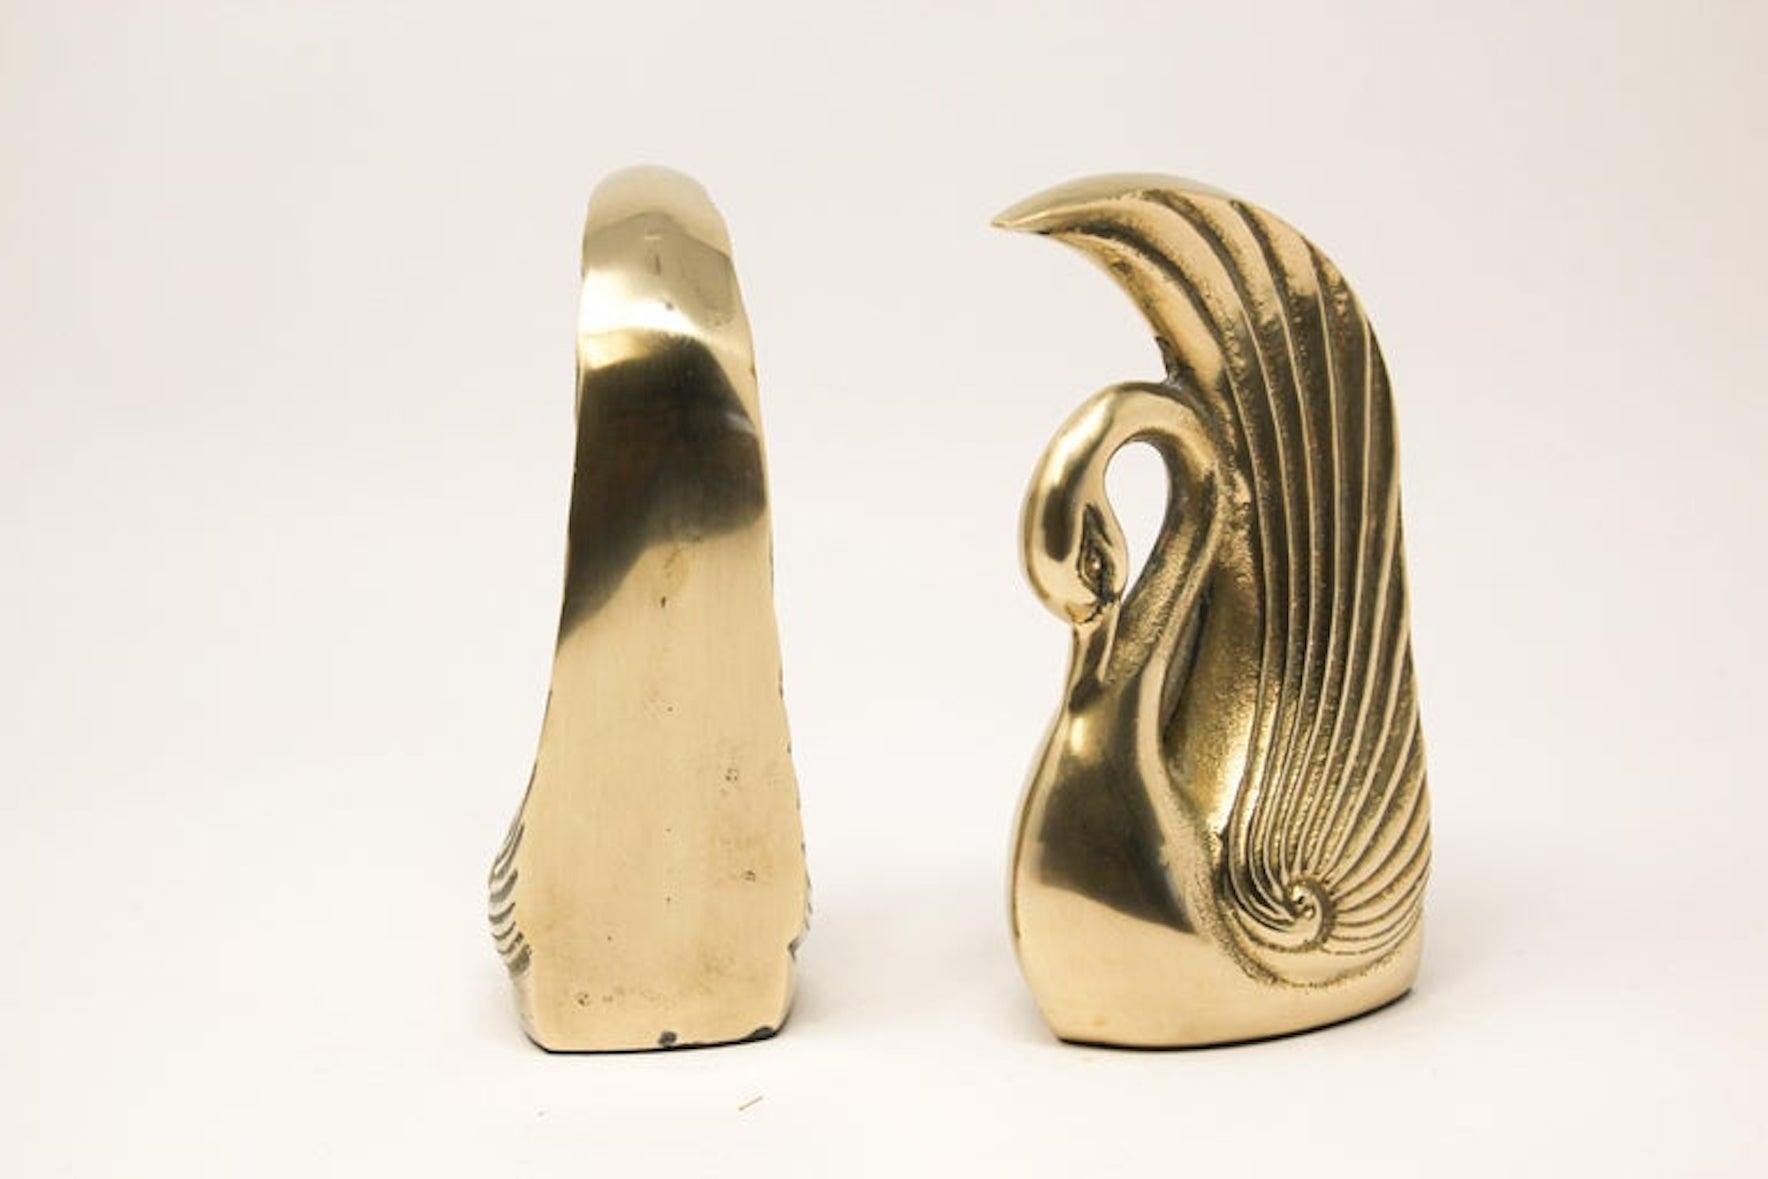 American Craftsman Pair of Vintage Polished Cast Brass Art Deco Swan Bookends, circa 1950